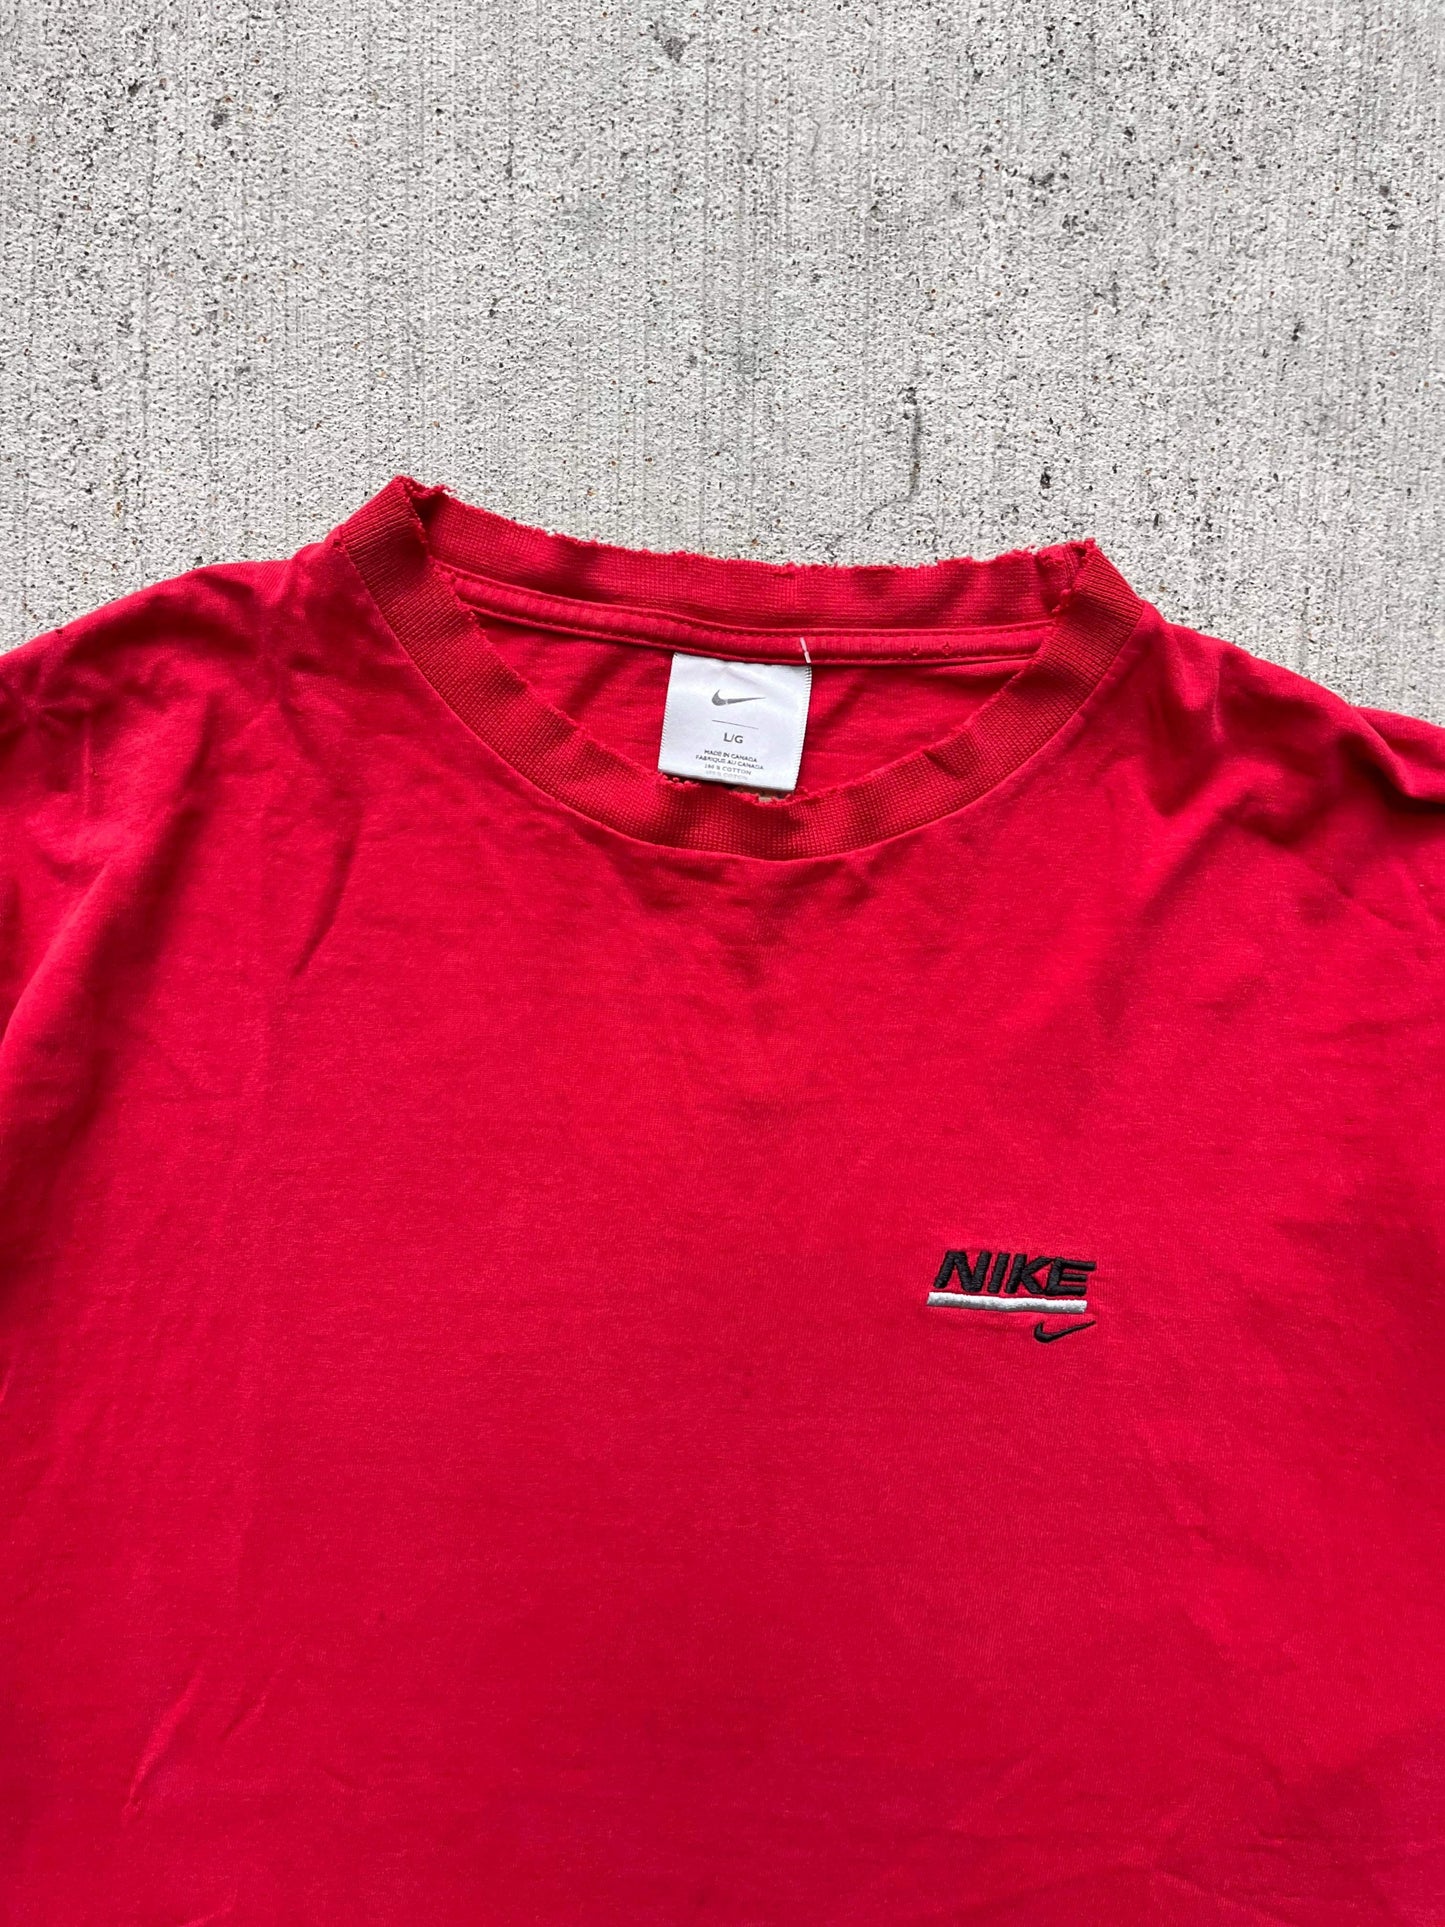 (XL/2XL) 90’s Nike Spellout Tee ~